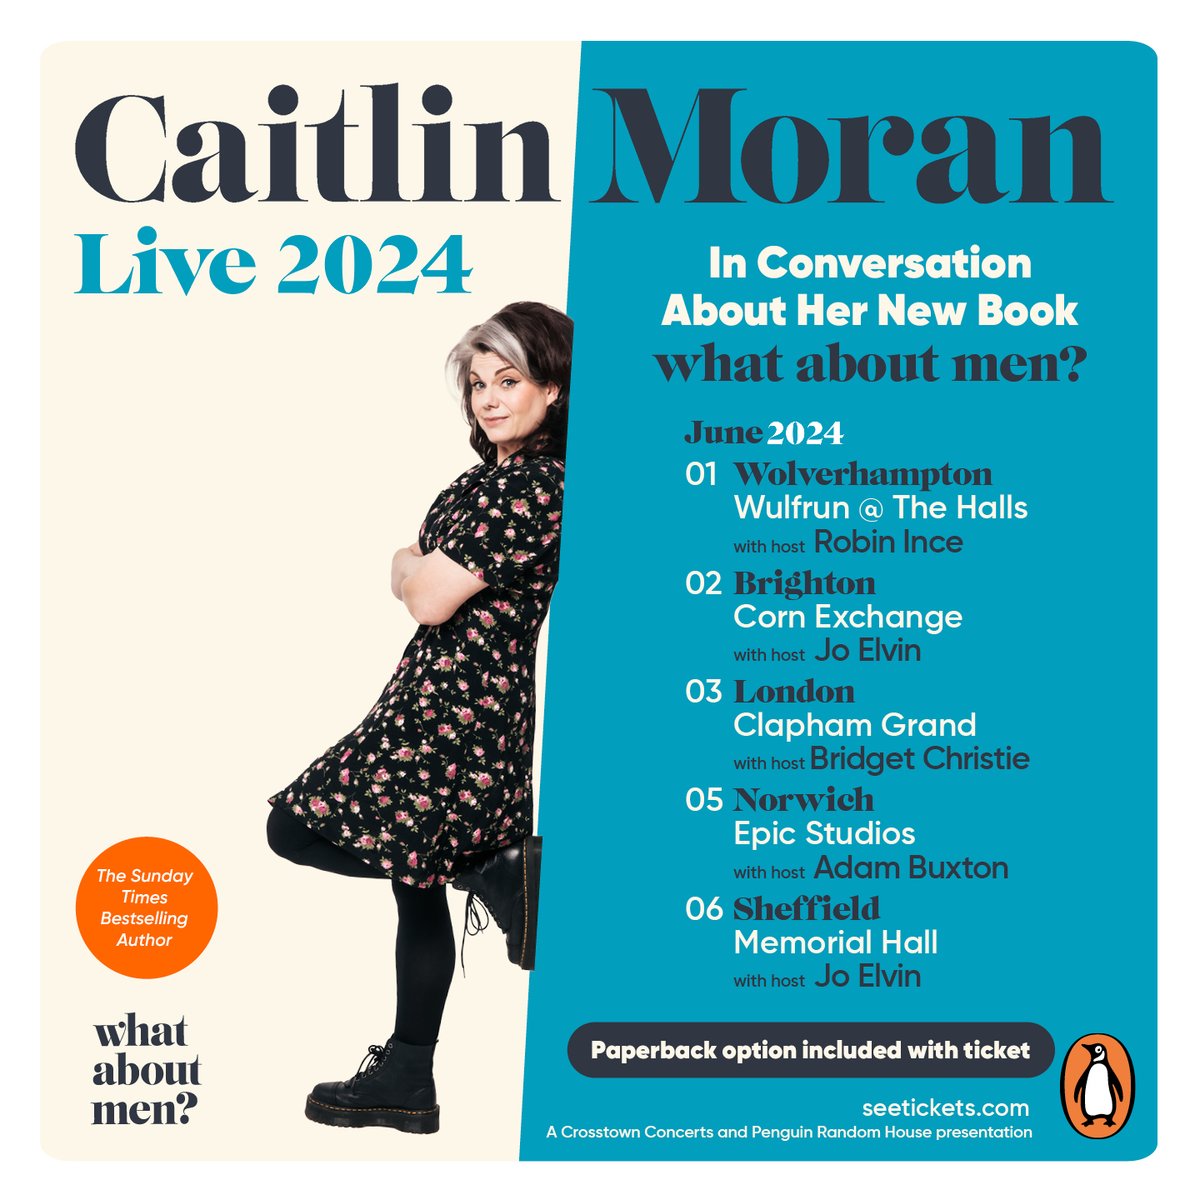 Hosts Robin Ince, Jo Elvin, Bridget Christie and Adam Buxton join @caitlinmoran on her book tour this June. Tickets are on sale here: crosstownconcerts.seetickets.com/search?q=caitl…